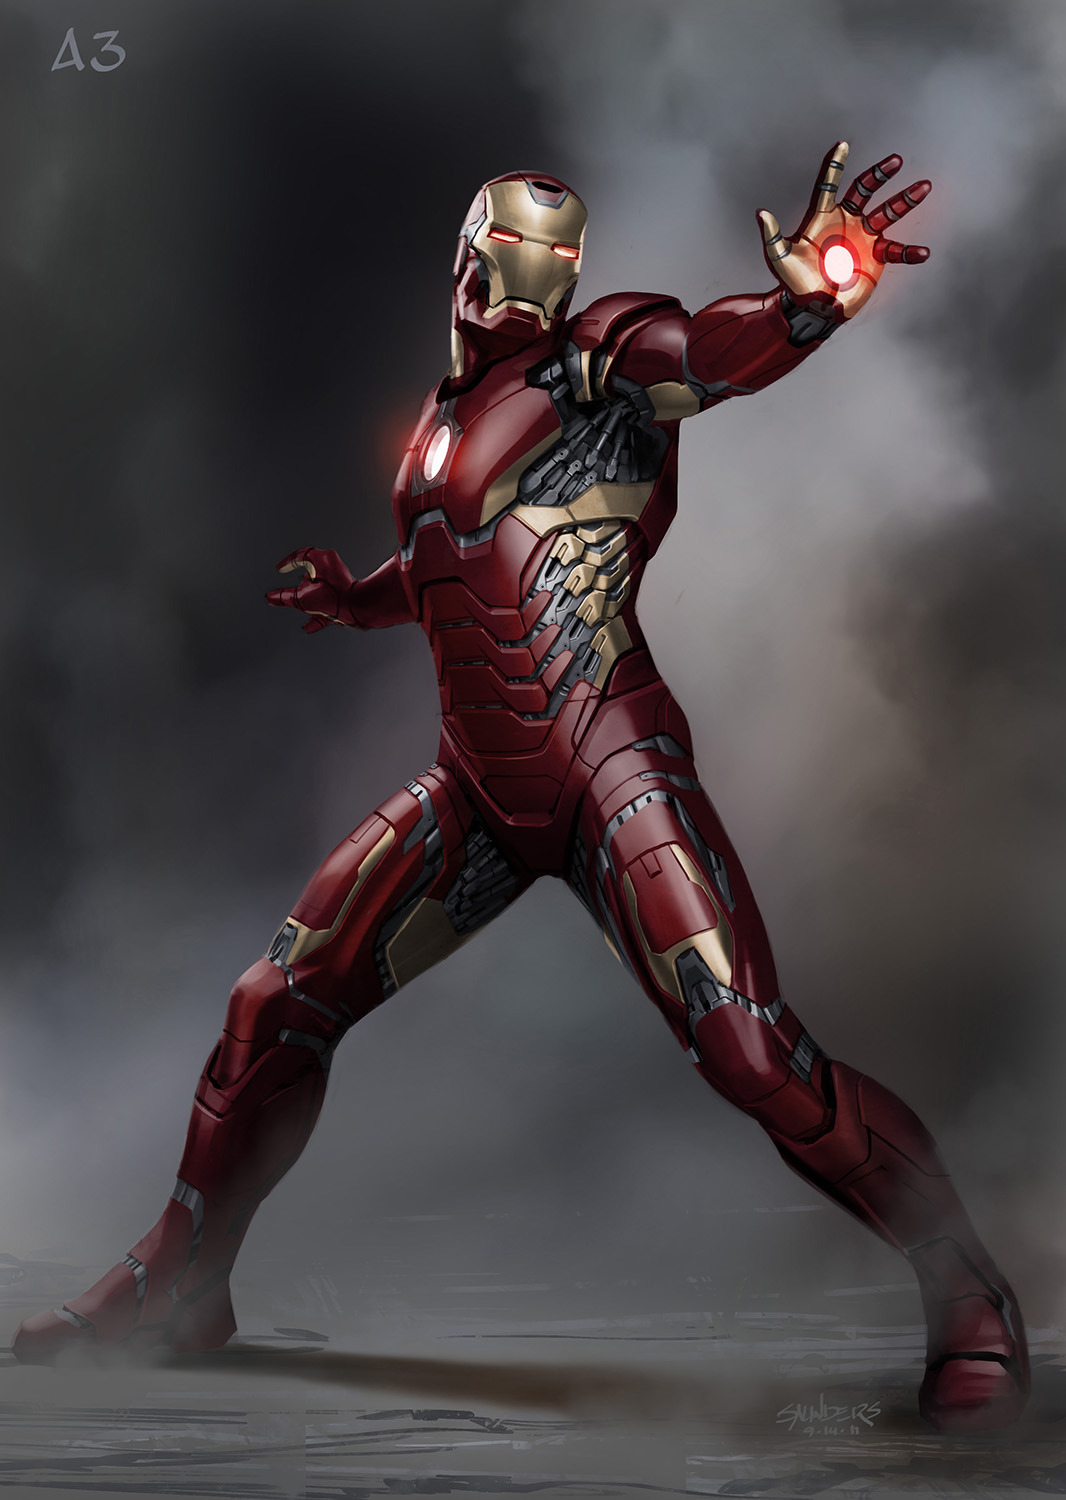 Incredible Iron Man 3 Concept Art By Phil Saunders Film Sketchr